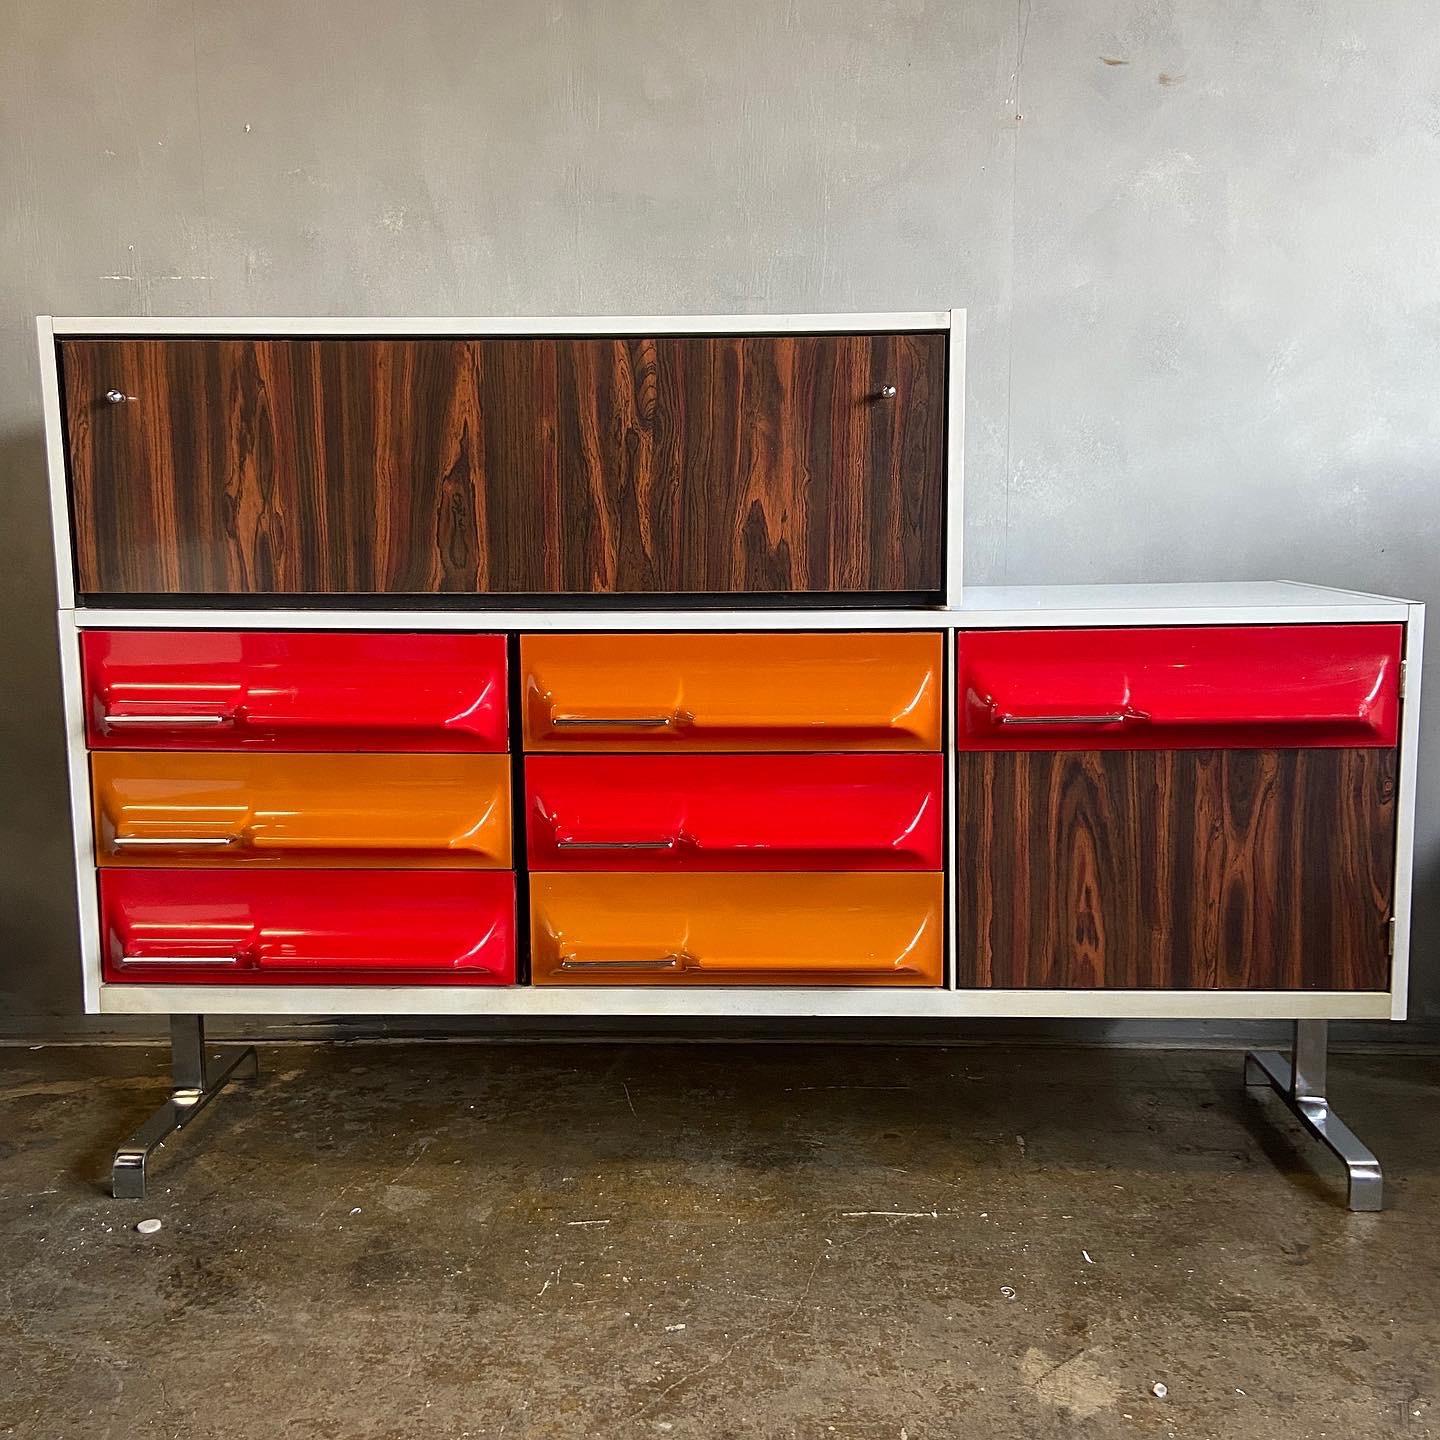 For  your consideration is this wonderful credenza designed by Giovanni Maur for Treco. A space age design featuring molded plastic fronts with laminate and rosewood details on a chrome base. This can can be used as a credenza or dresser and the top